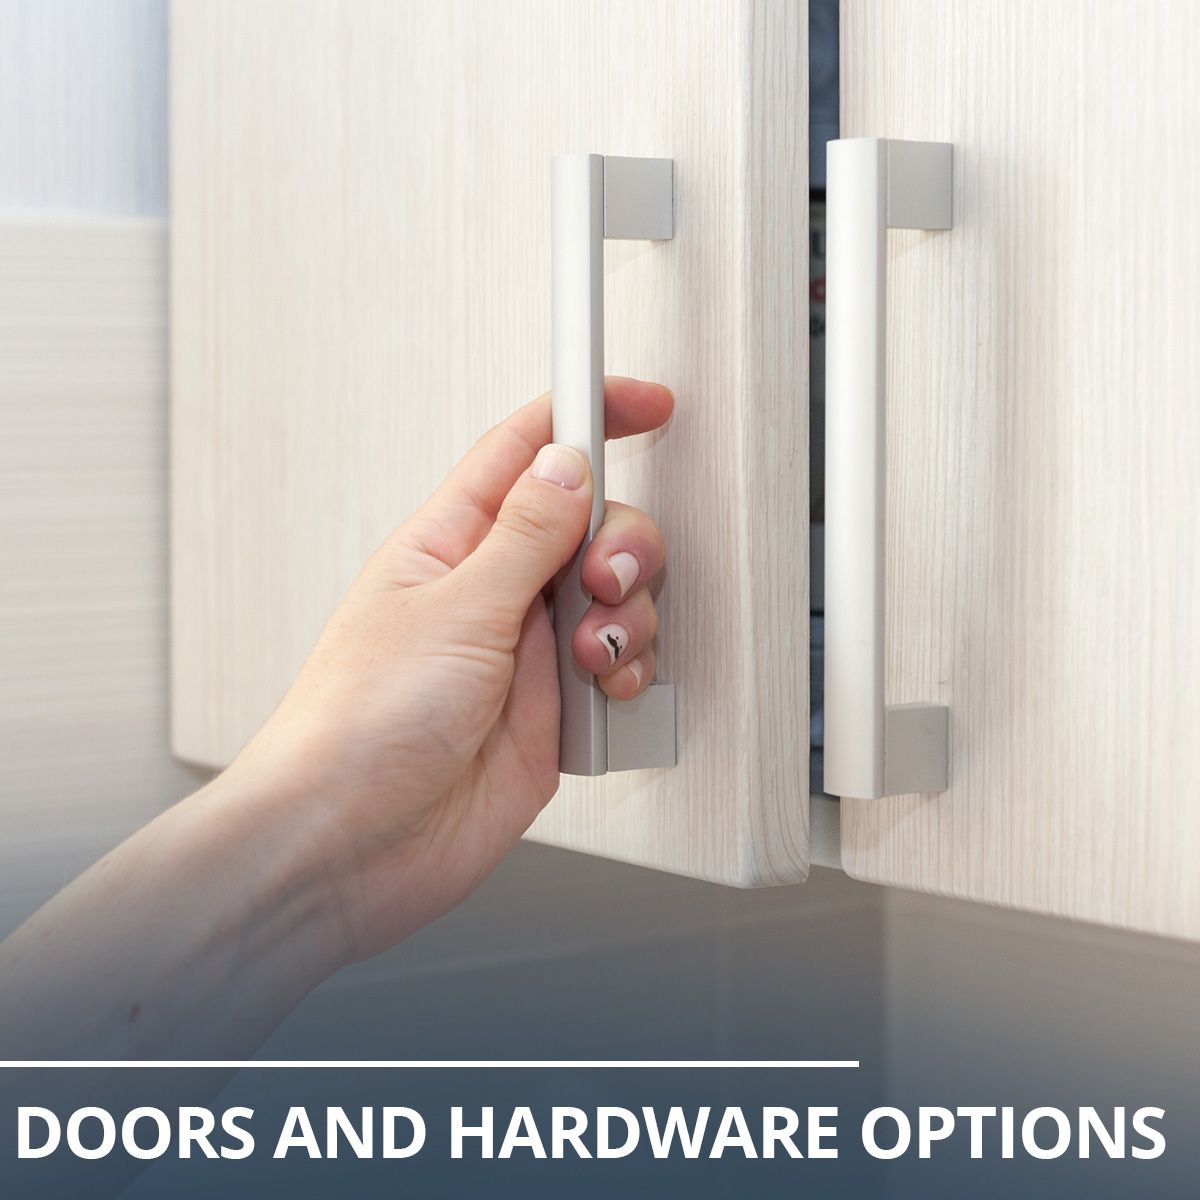 Doors and Hardware Options